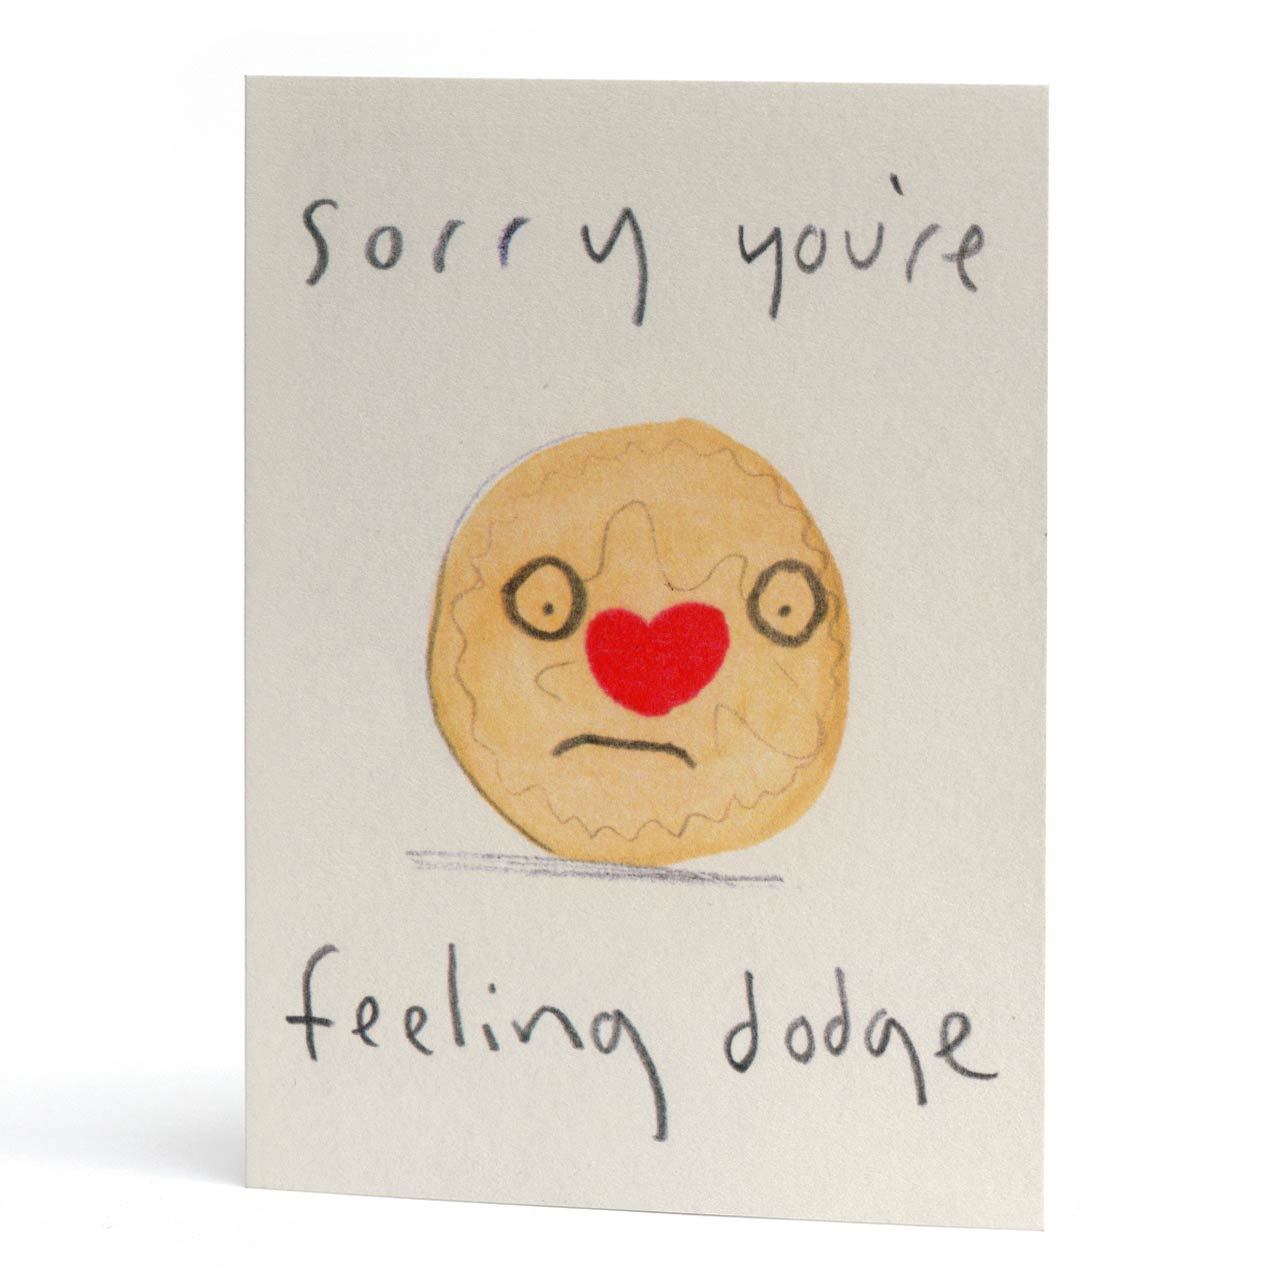 Sorry You're Feeling Dodge Greeting Card